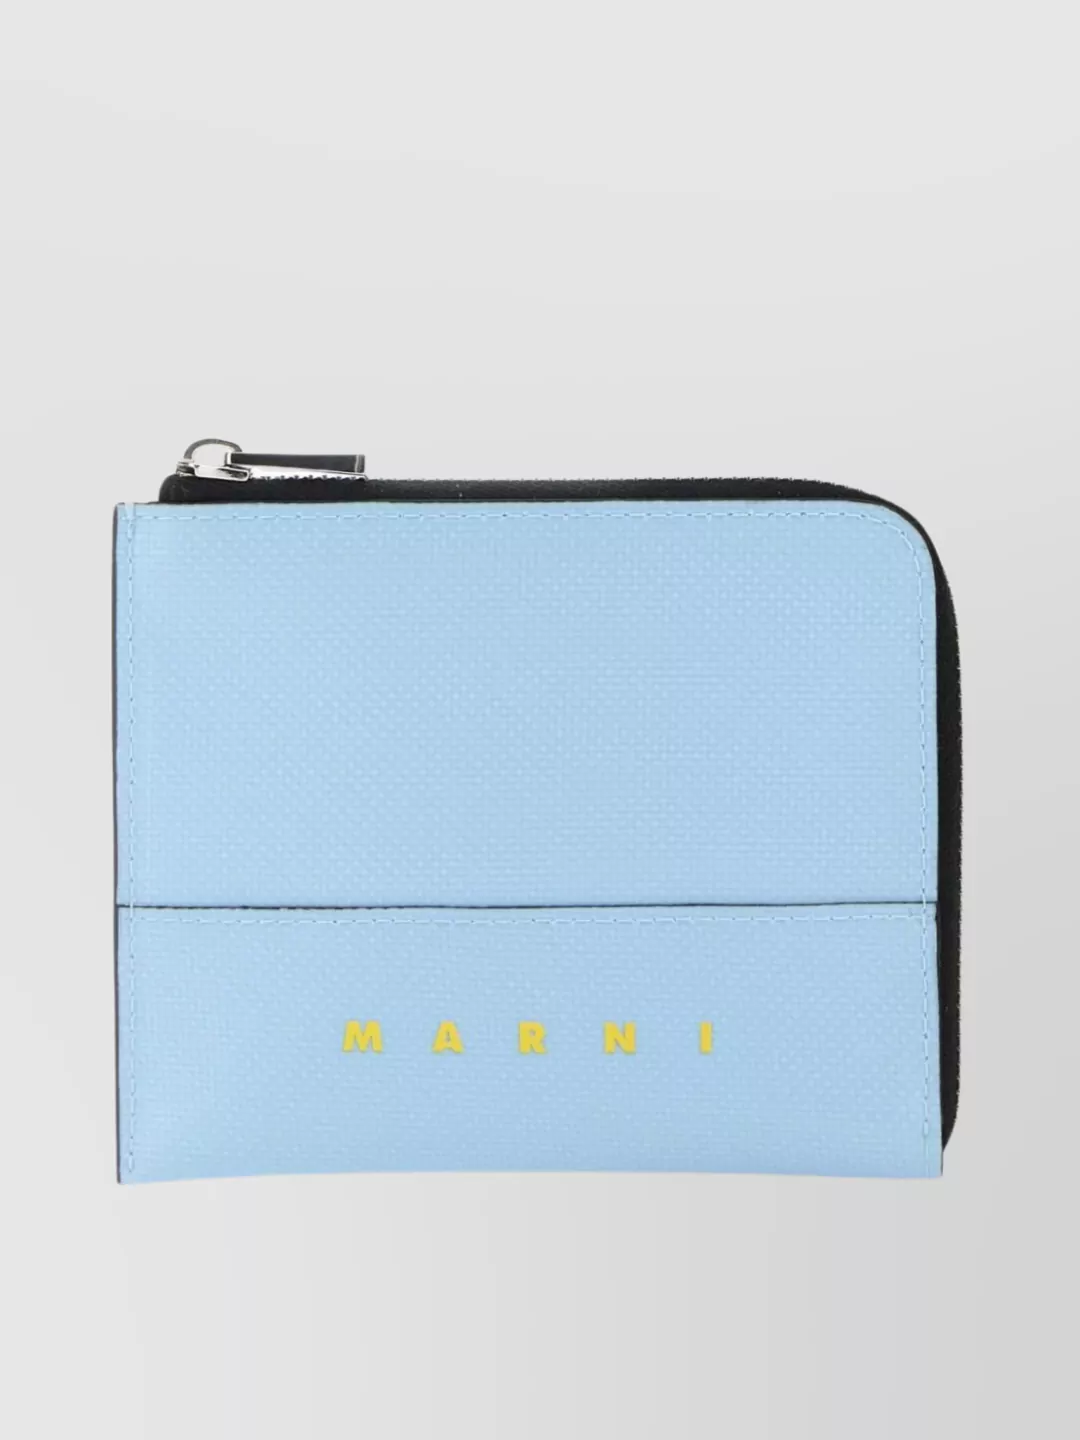 Shop Marni Pvc Wallet With Contrast Piping And Textured Finish